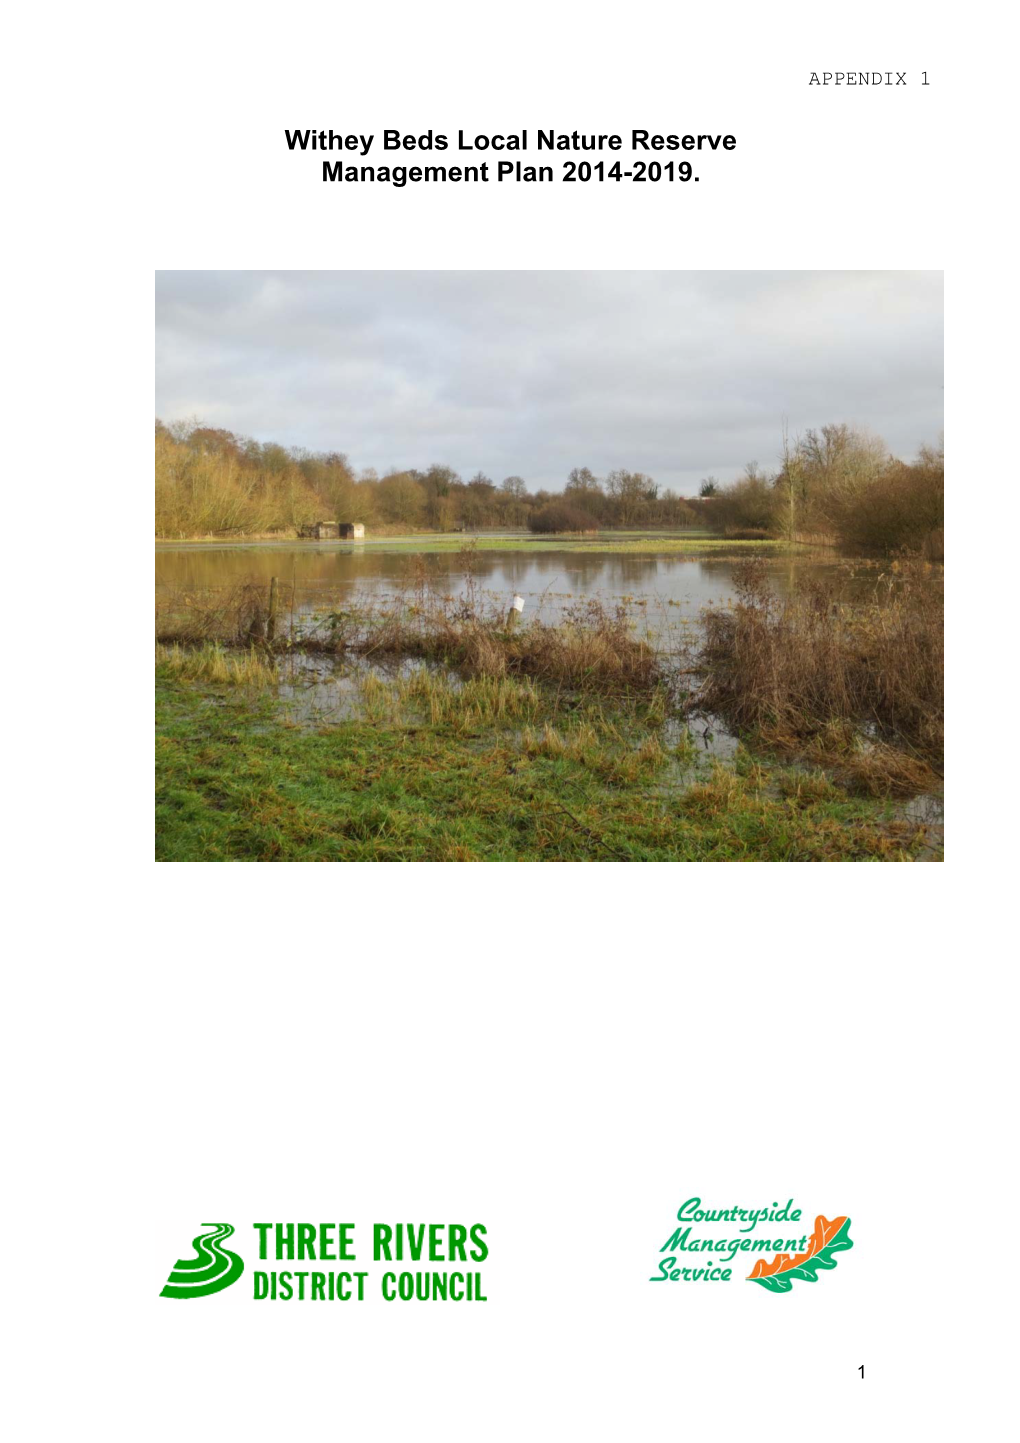 Withey Beds Local Nature Reserve Management Plan 2014-2019